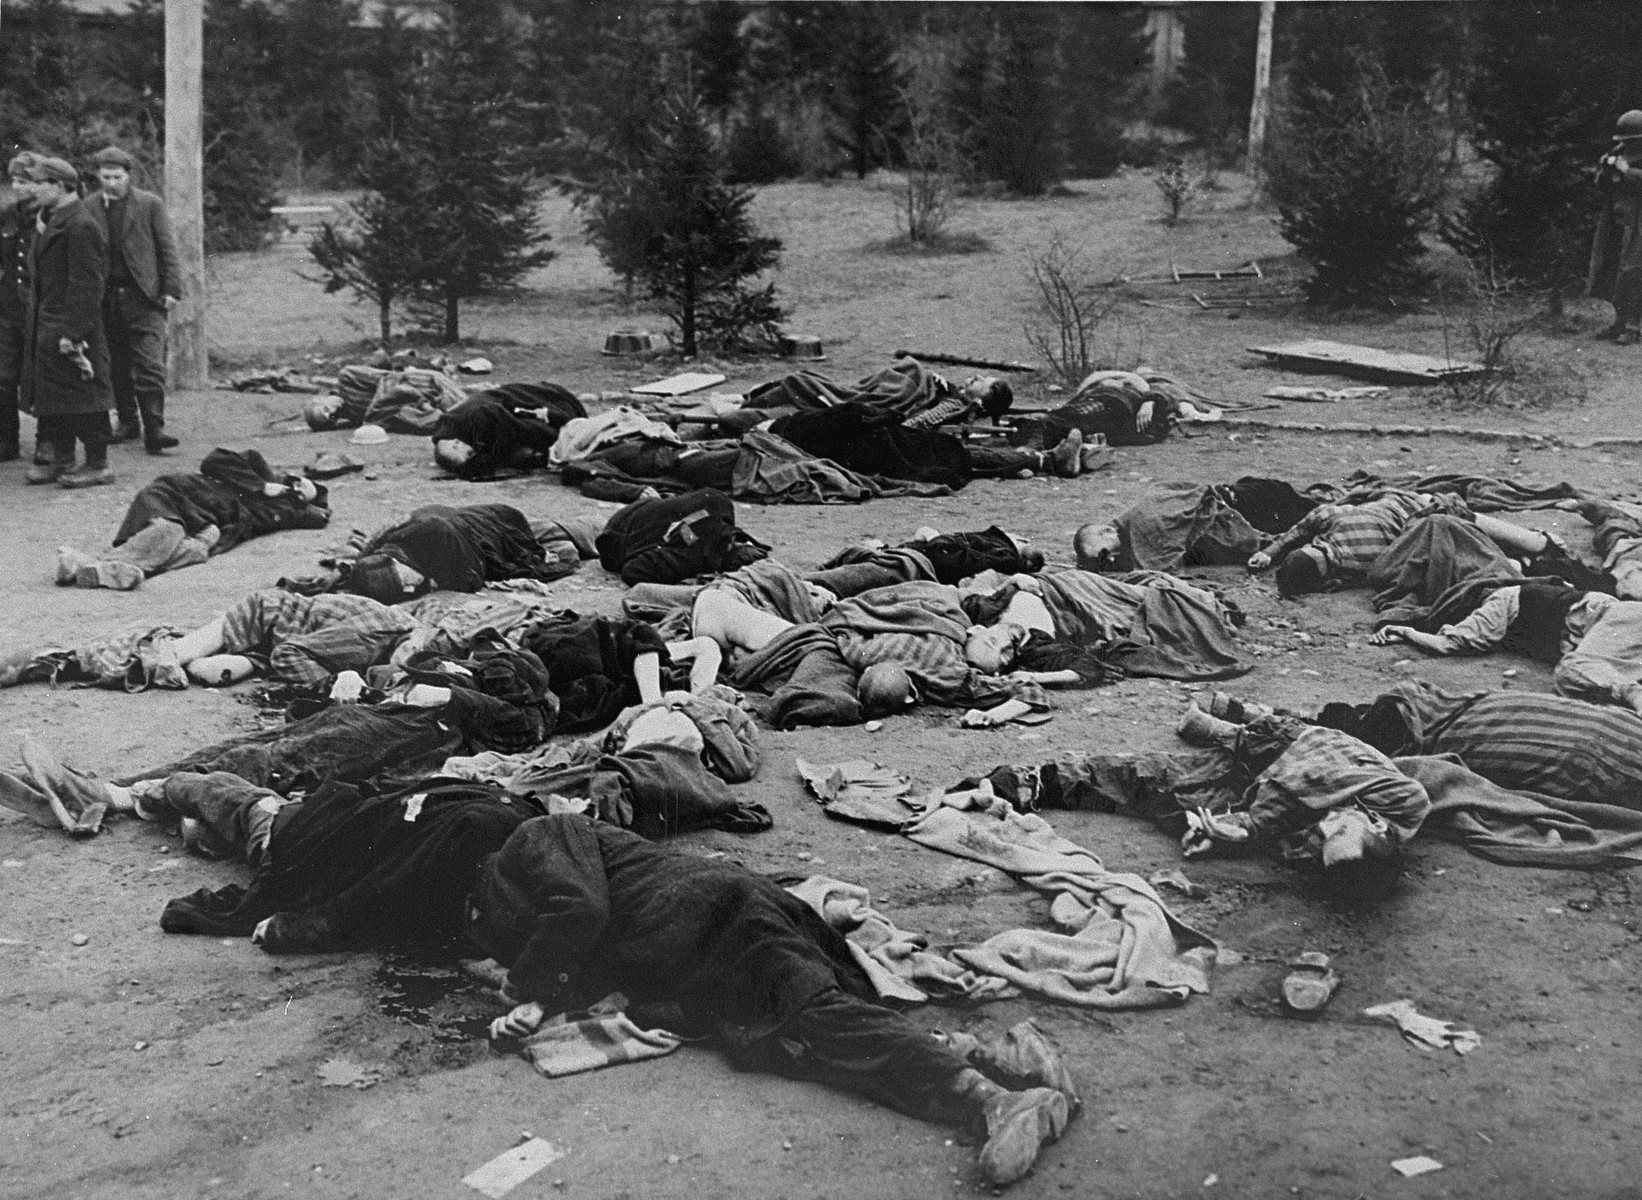 The corpses of Polish slave laborers who were machine-gunned by the SS prior to the evacuation of the camp.